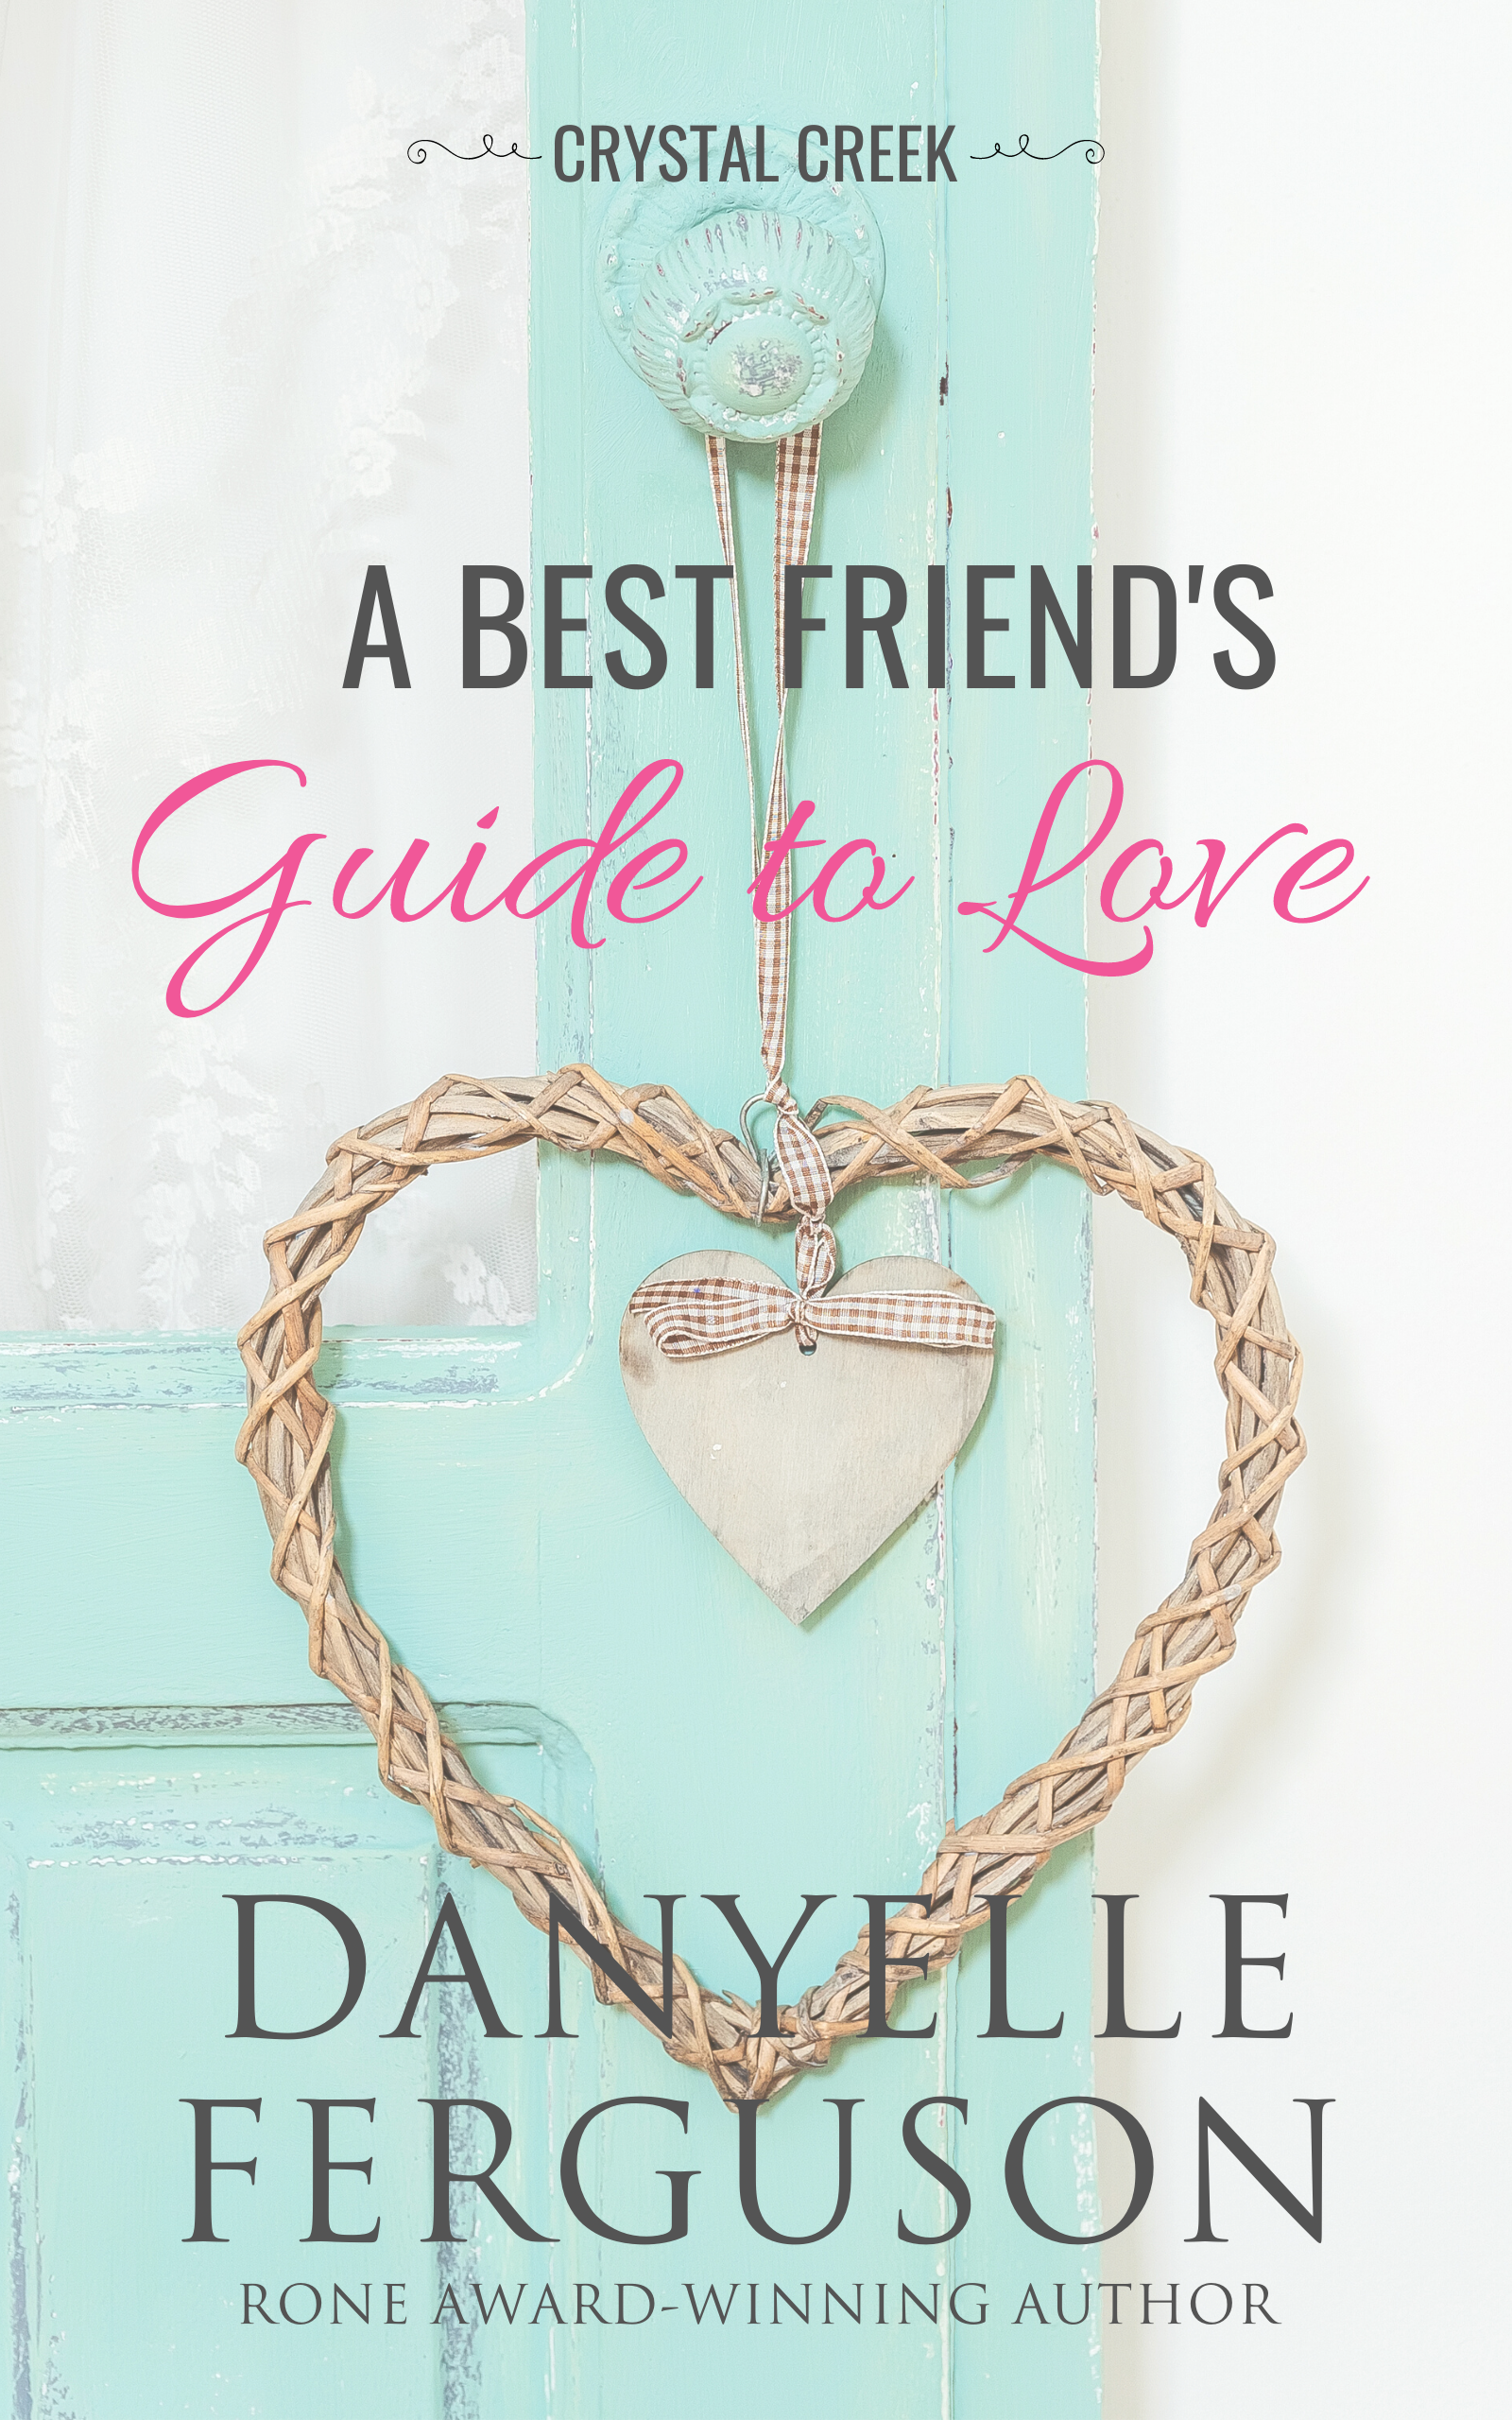 A Best Friend’s Guide to Love